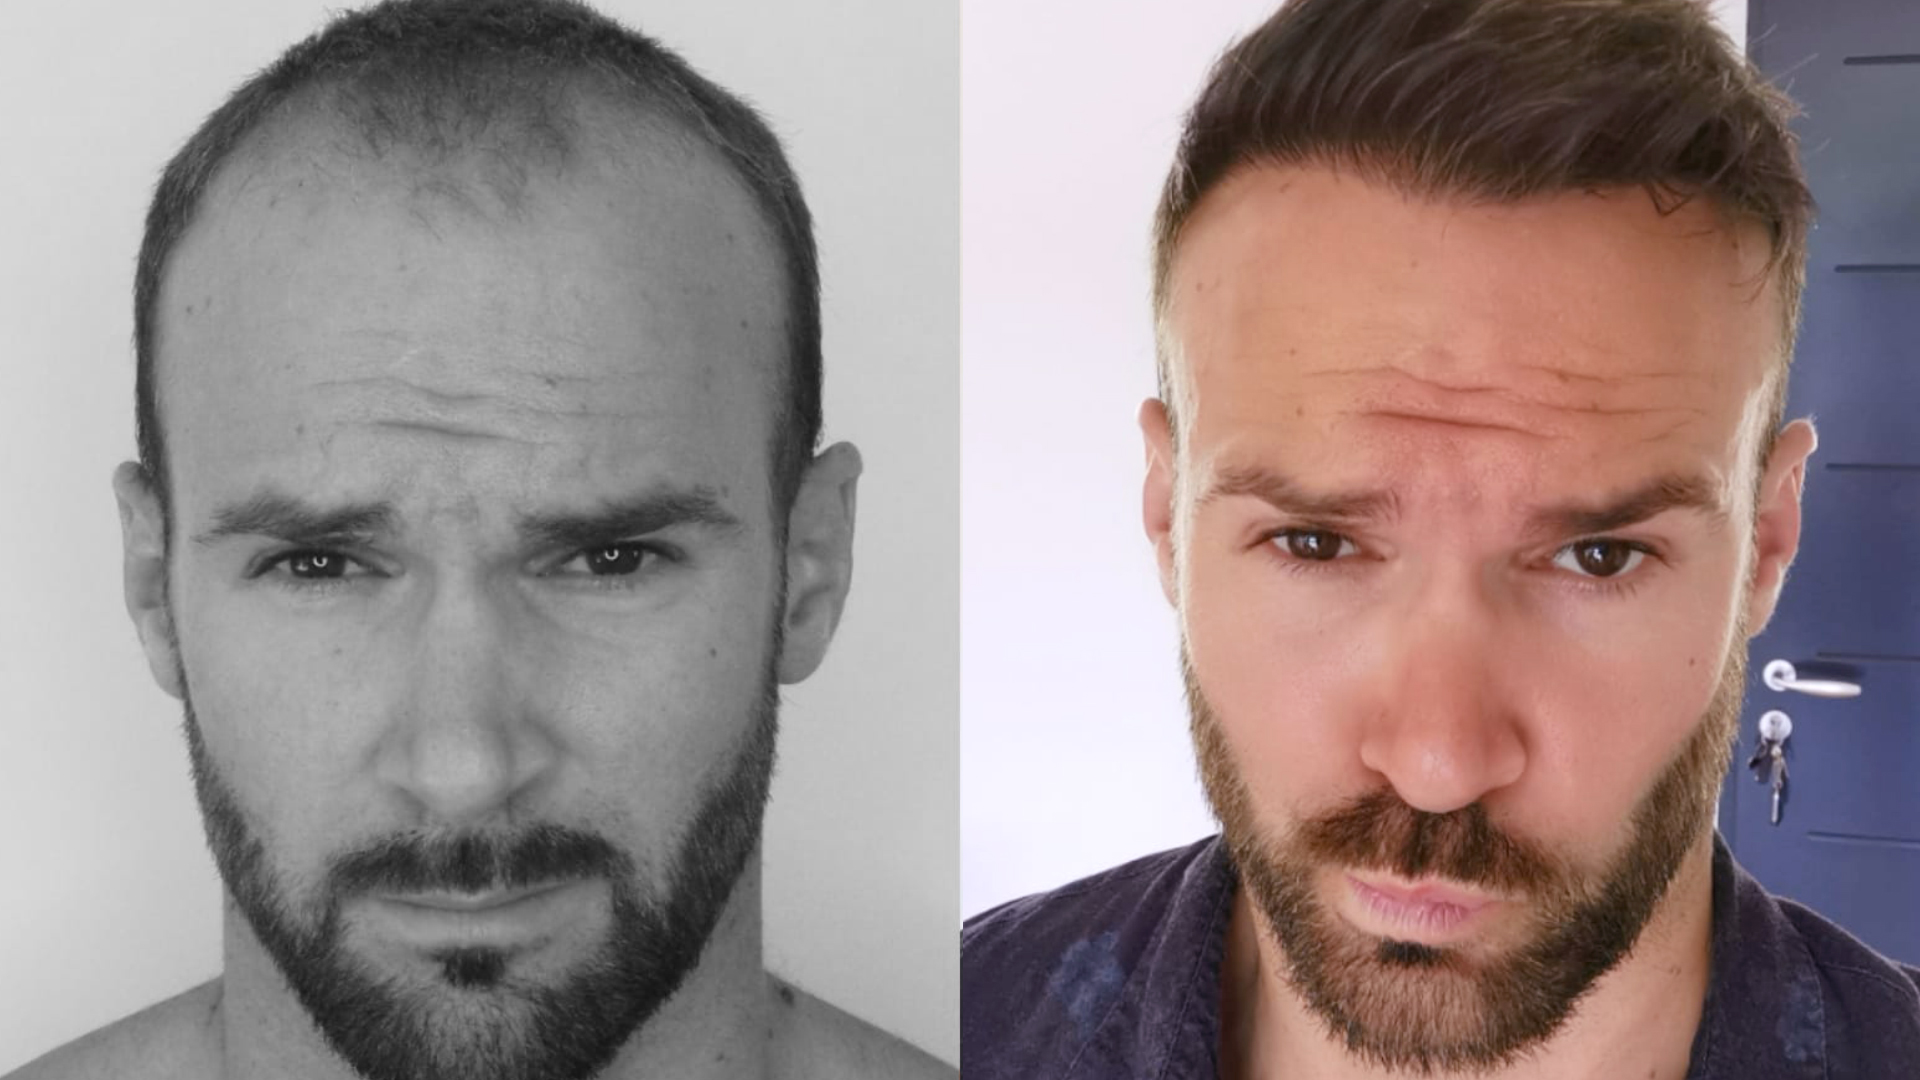 Witness Remarkable Hair Transplant Results Before and After  Elithair